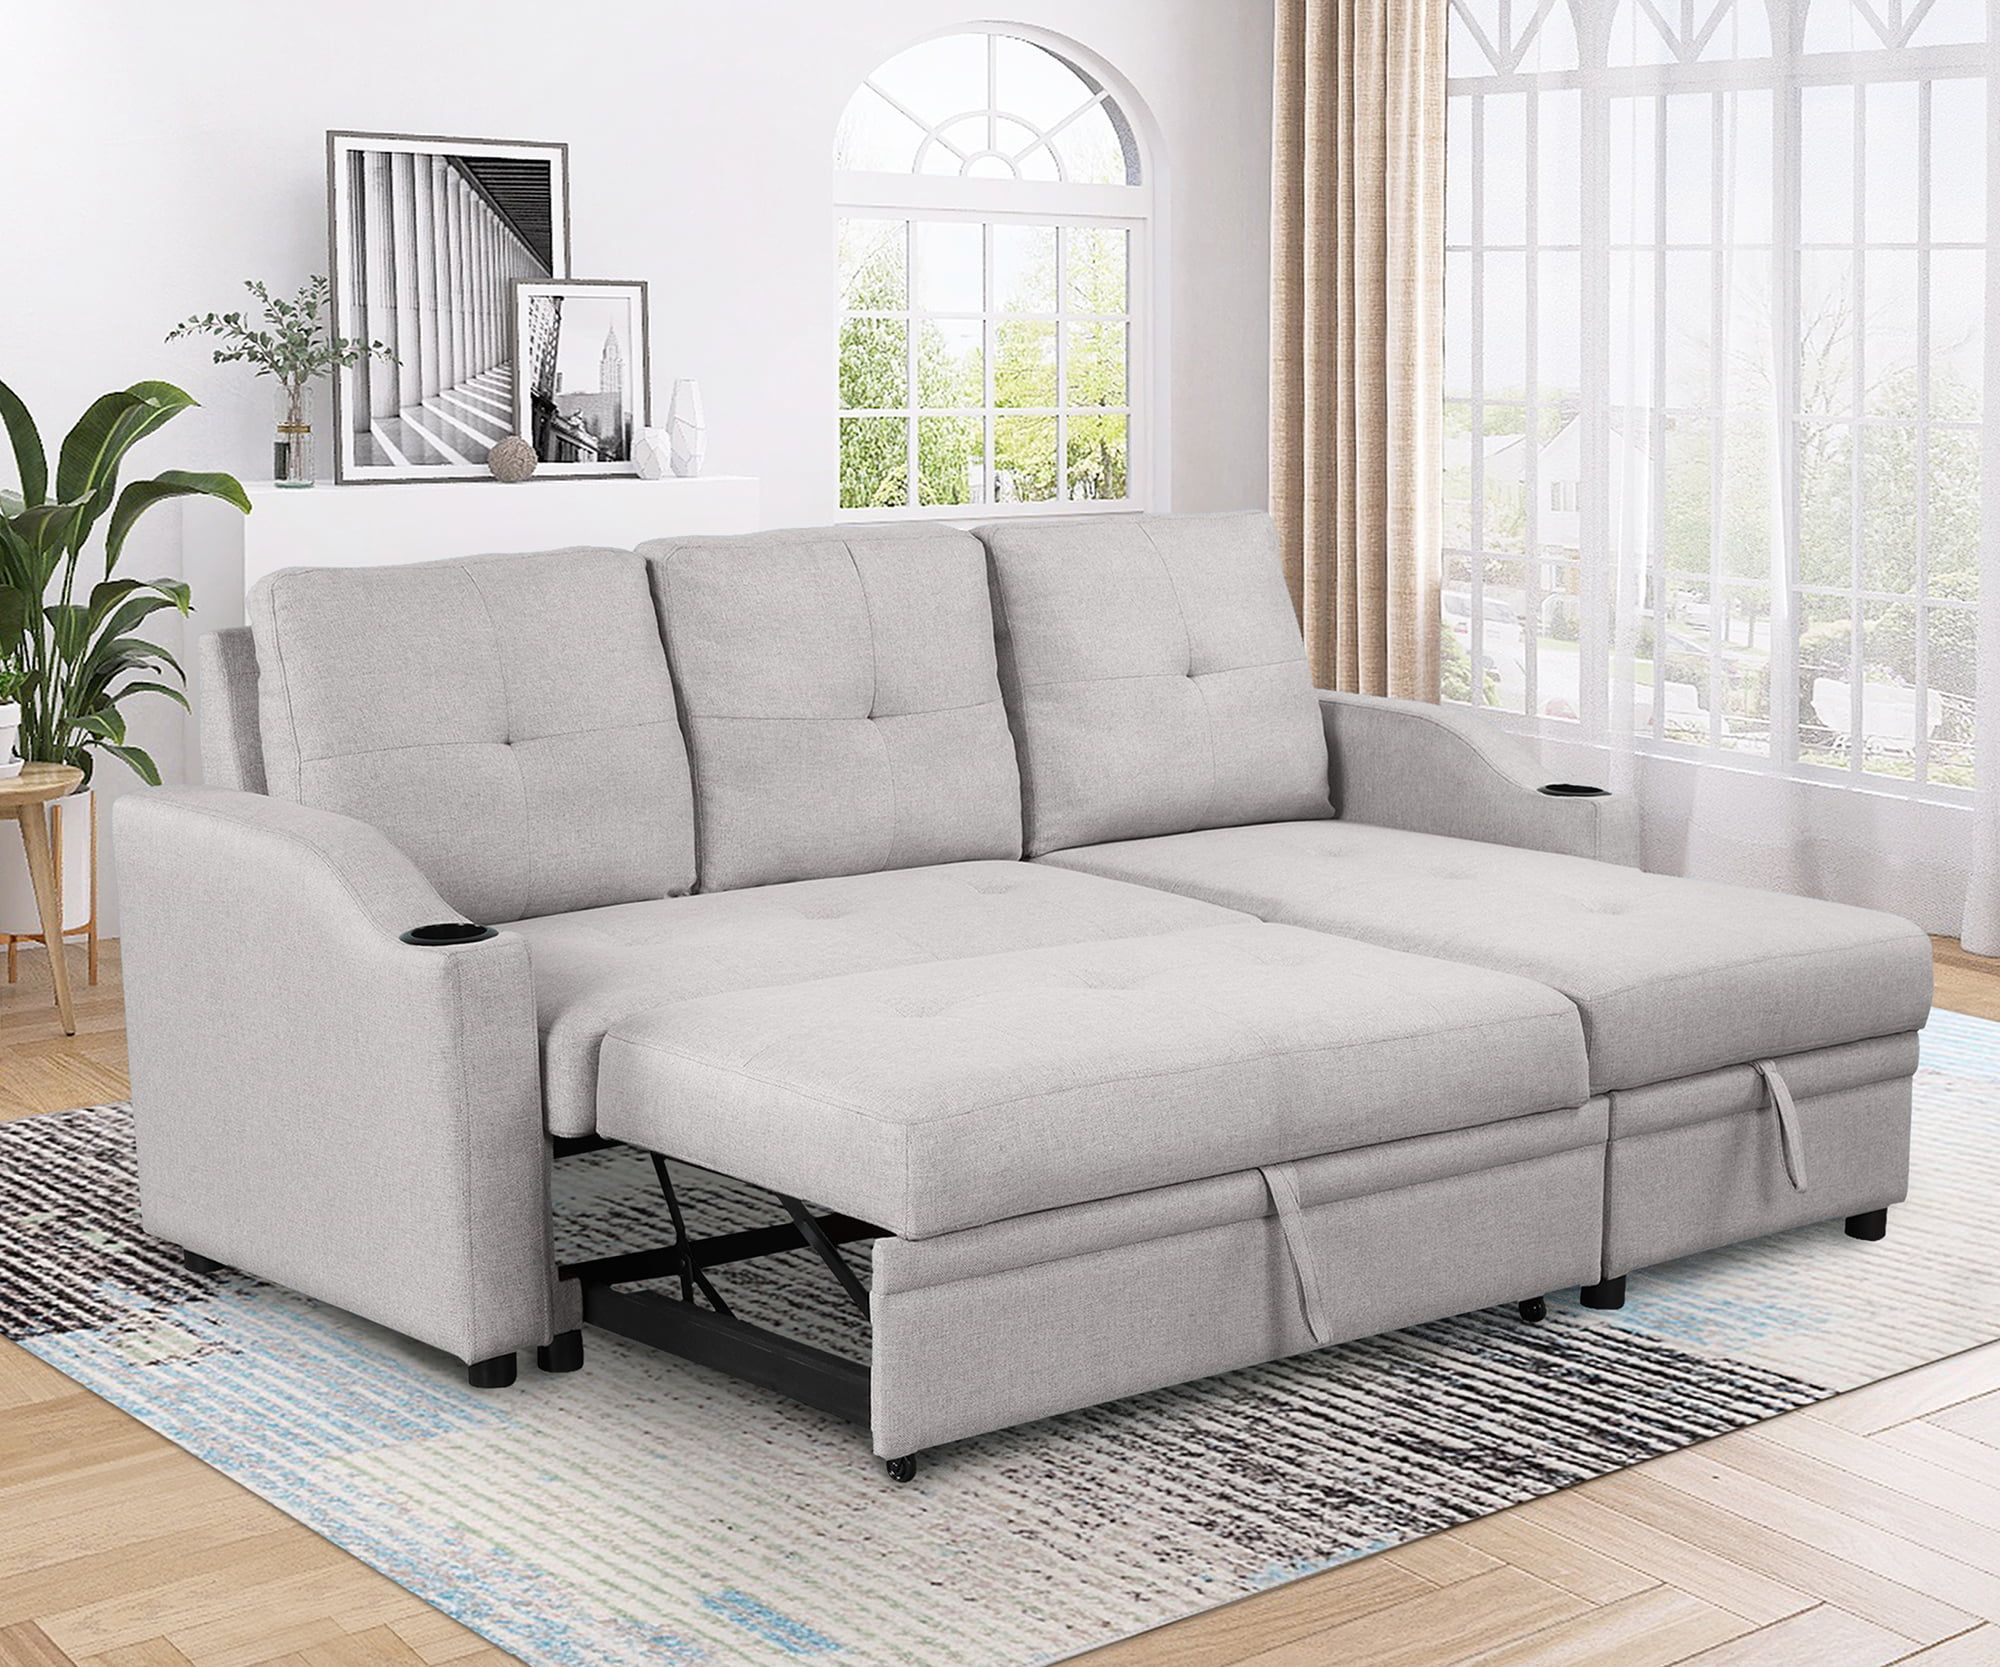 Churanty Pull Out Bed Sleeper Sectional Sofa Upholstery Reversible Couch  With Storage Chaise Cup Holder For Small Spaces,gray – Walmart With Reversible Pull Out Sofa Couches (View 2 of 20)